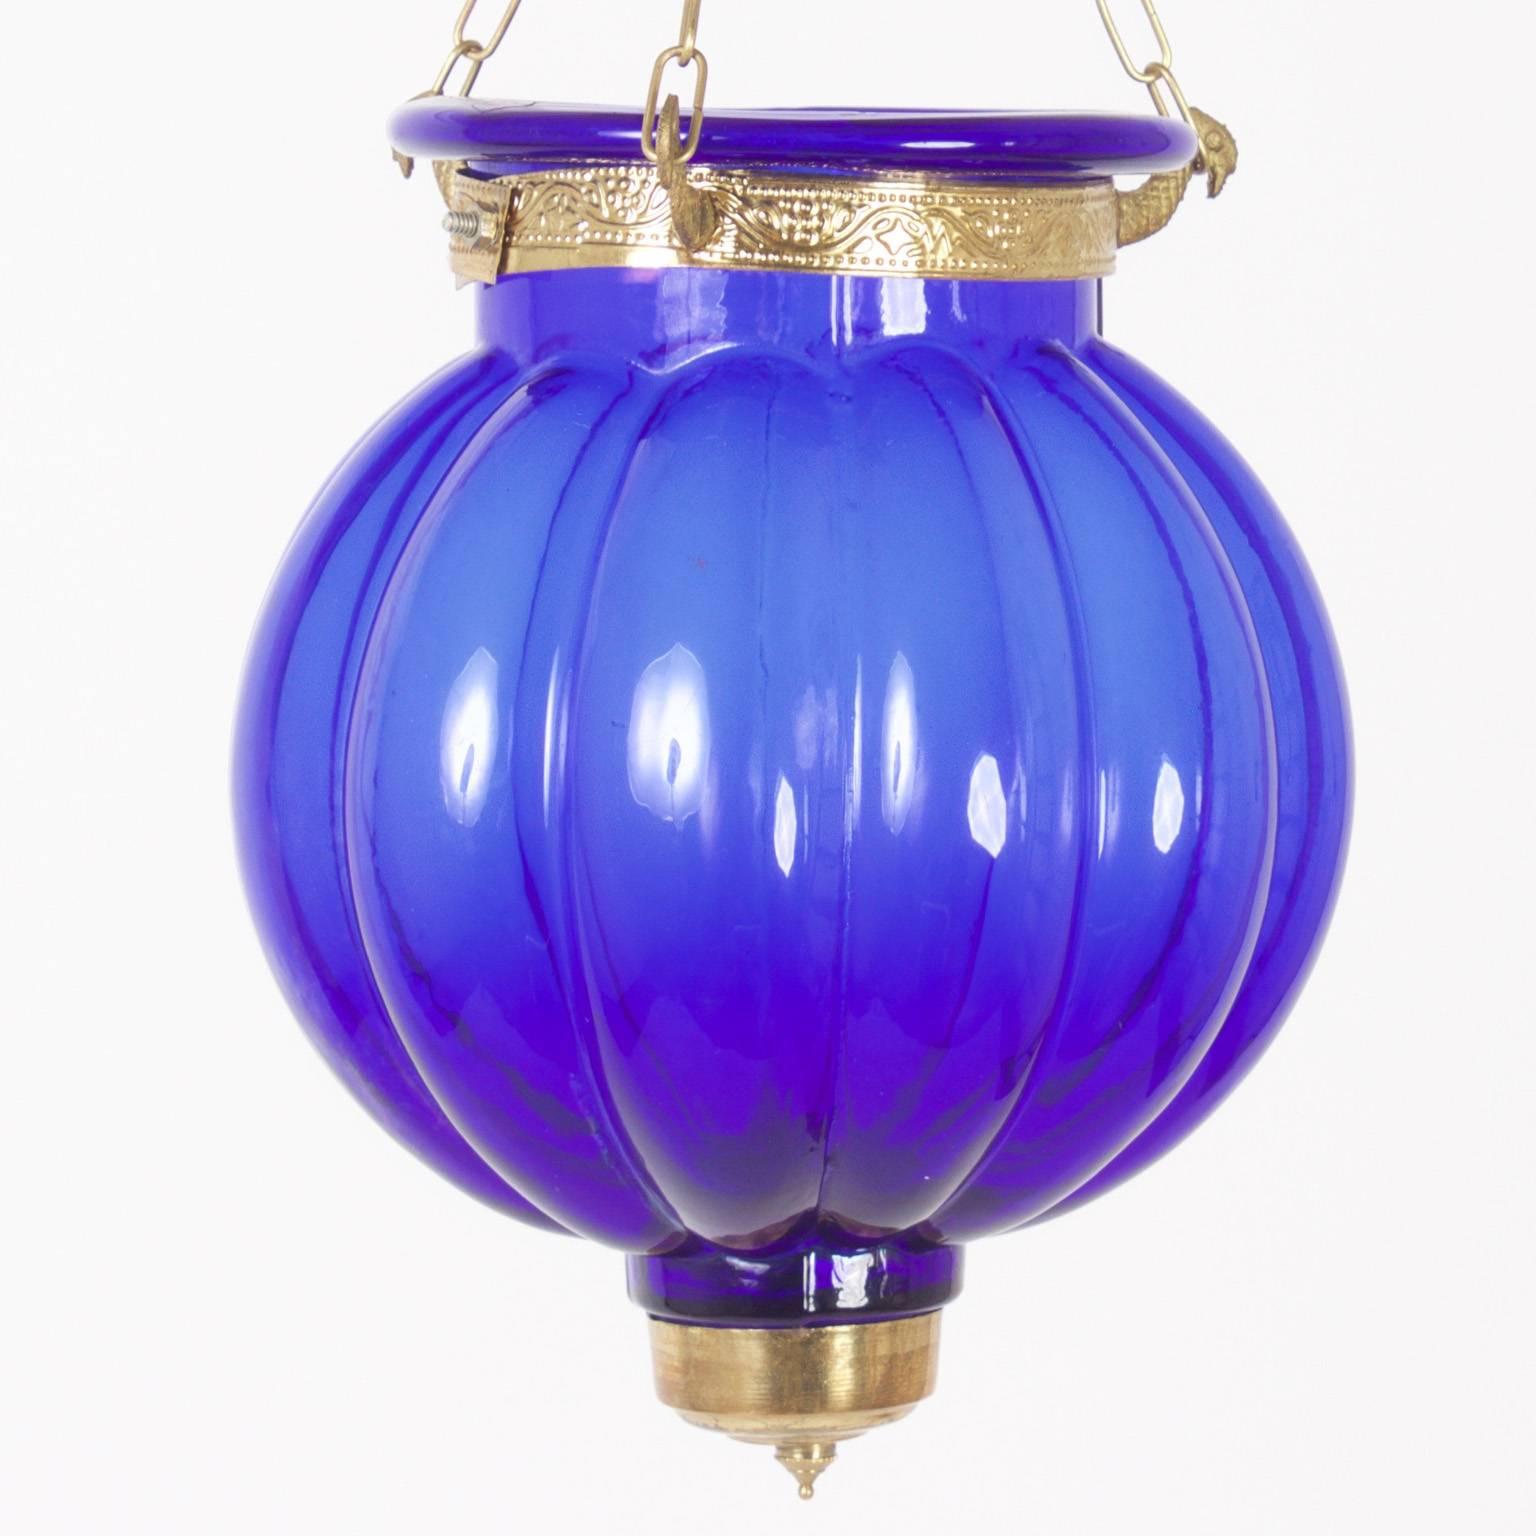 Anglo-Indian bell jar light fixture composed of luxurious cobalt blue pleated glass and finely tooled brass hardware. Contact for wiring.
 